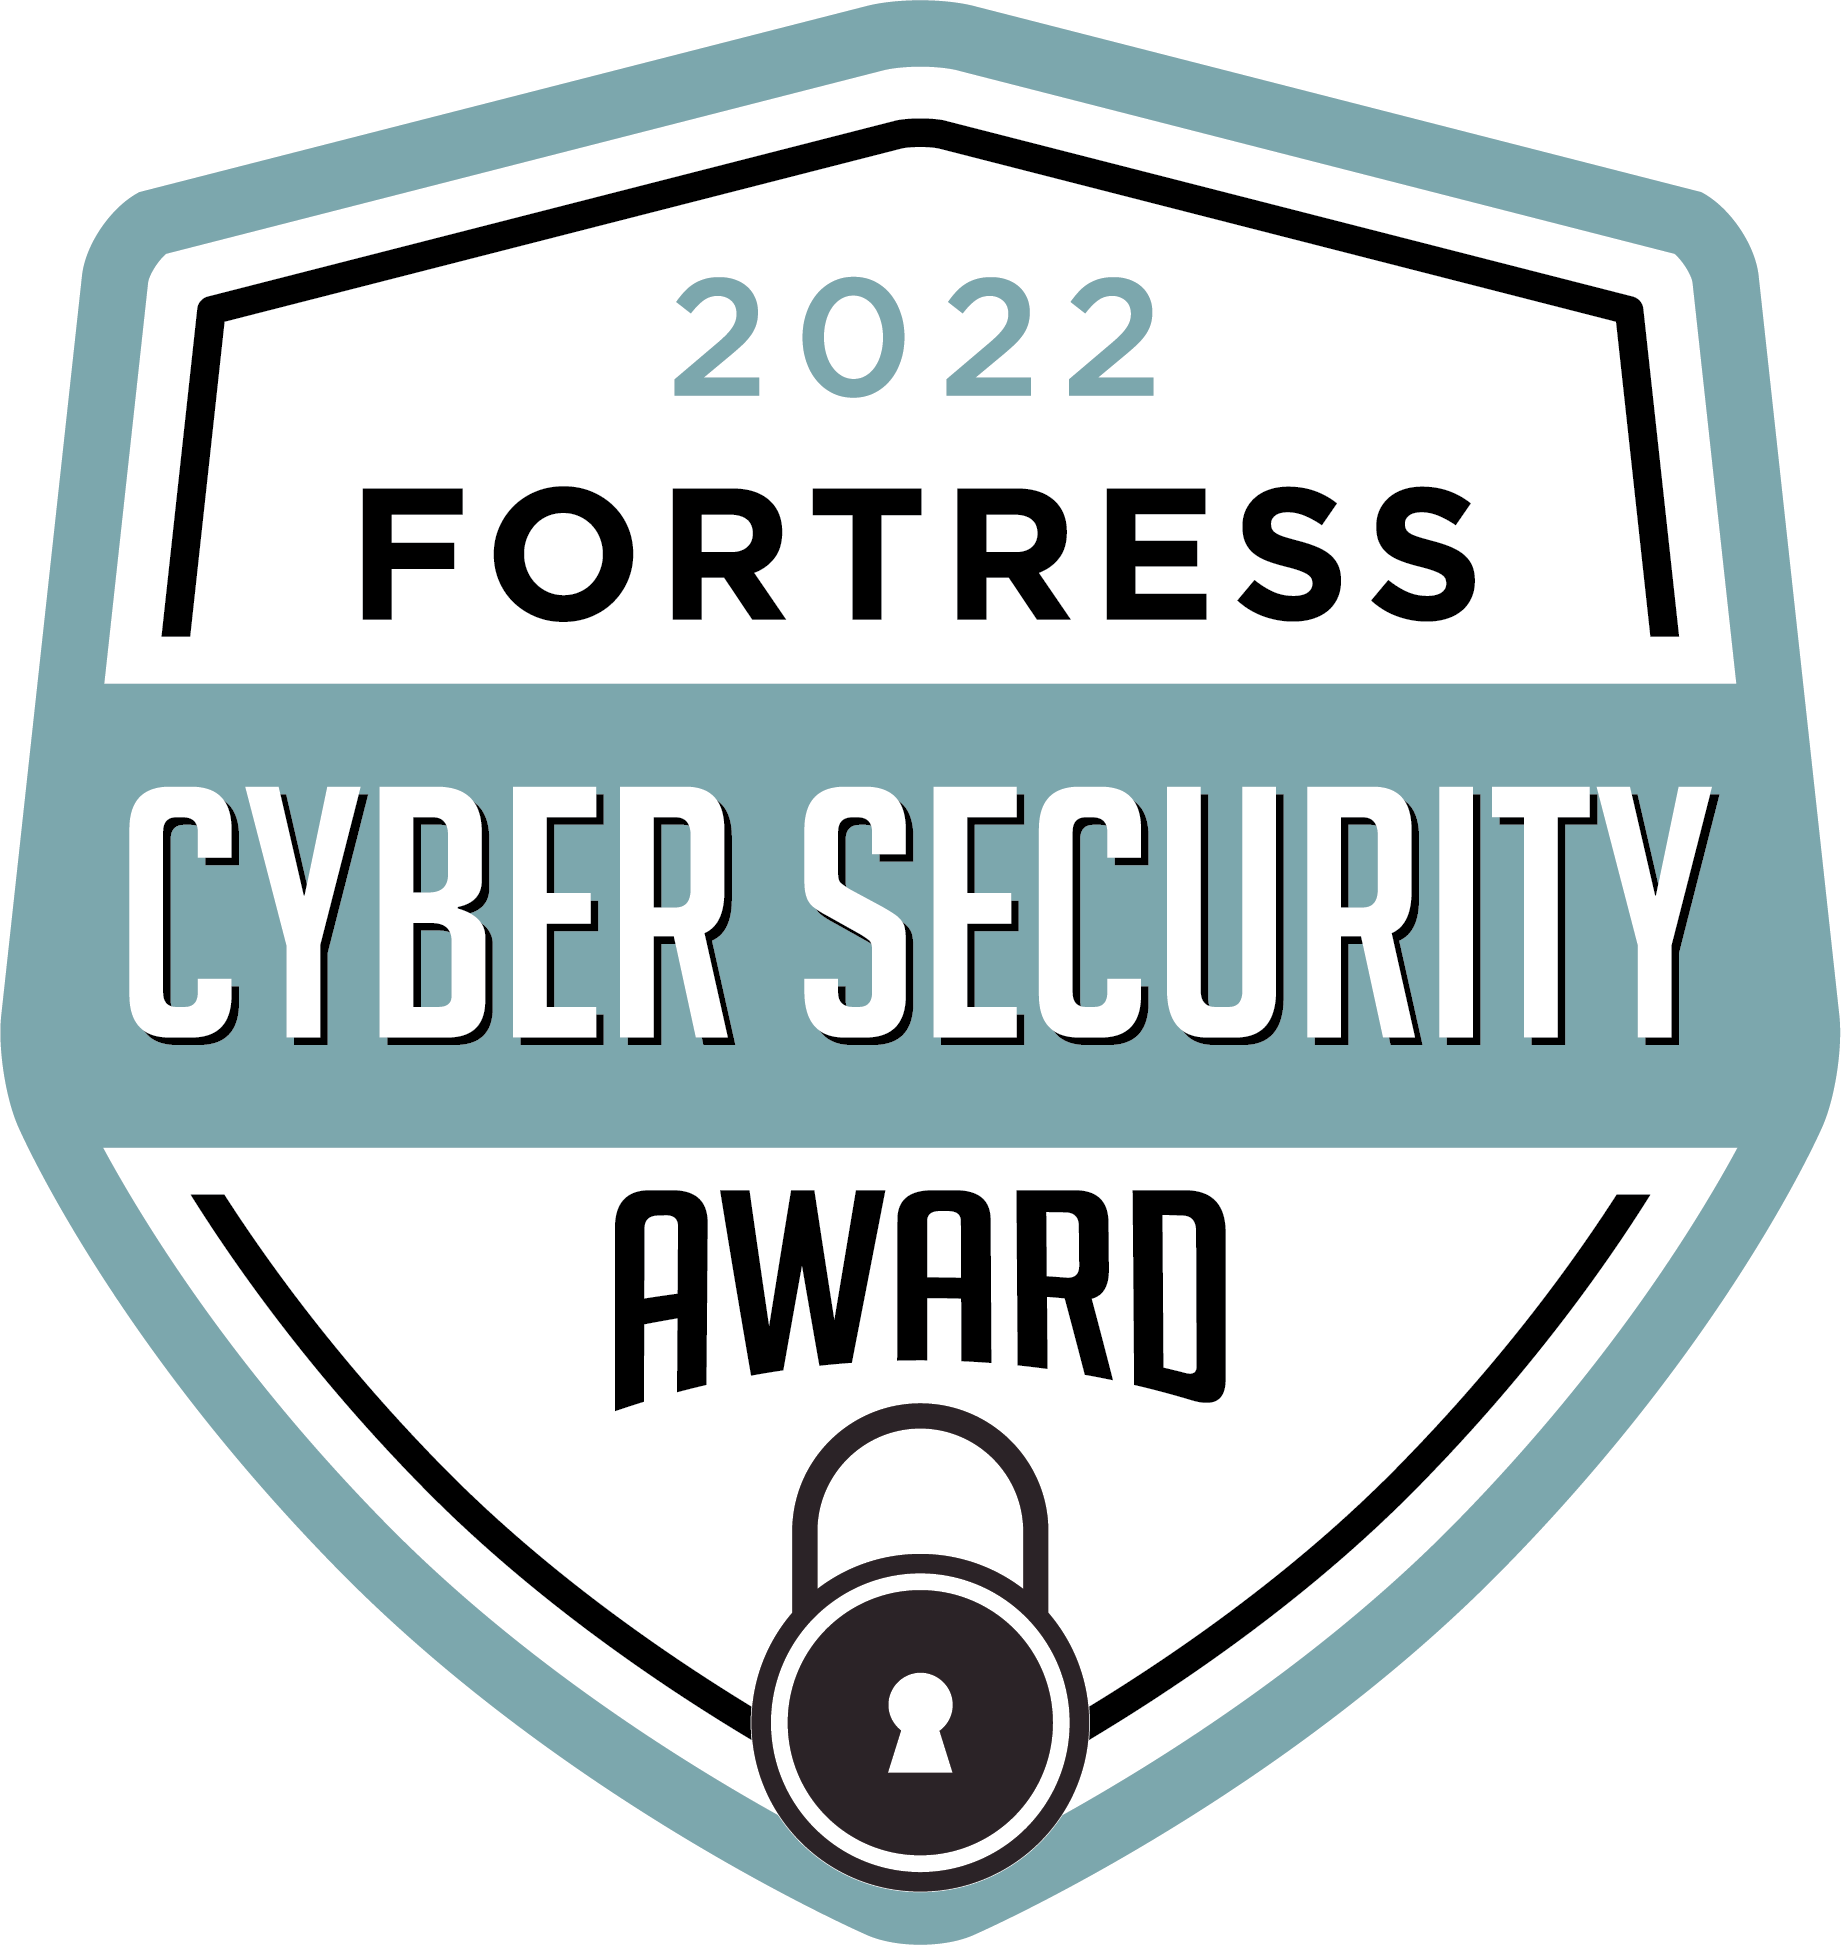 2022 Fortress Cyber Security Award